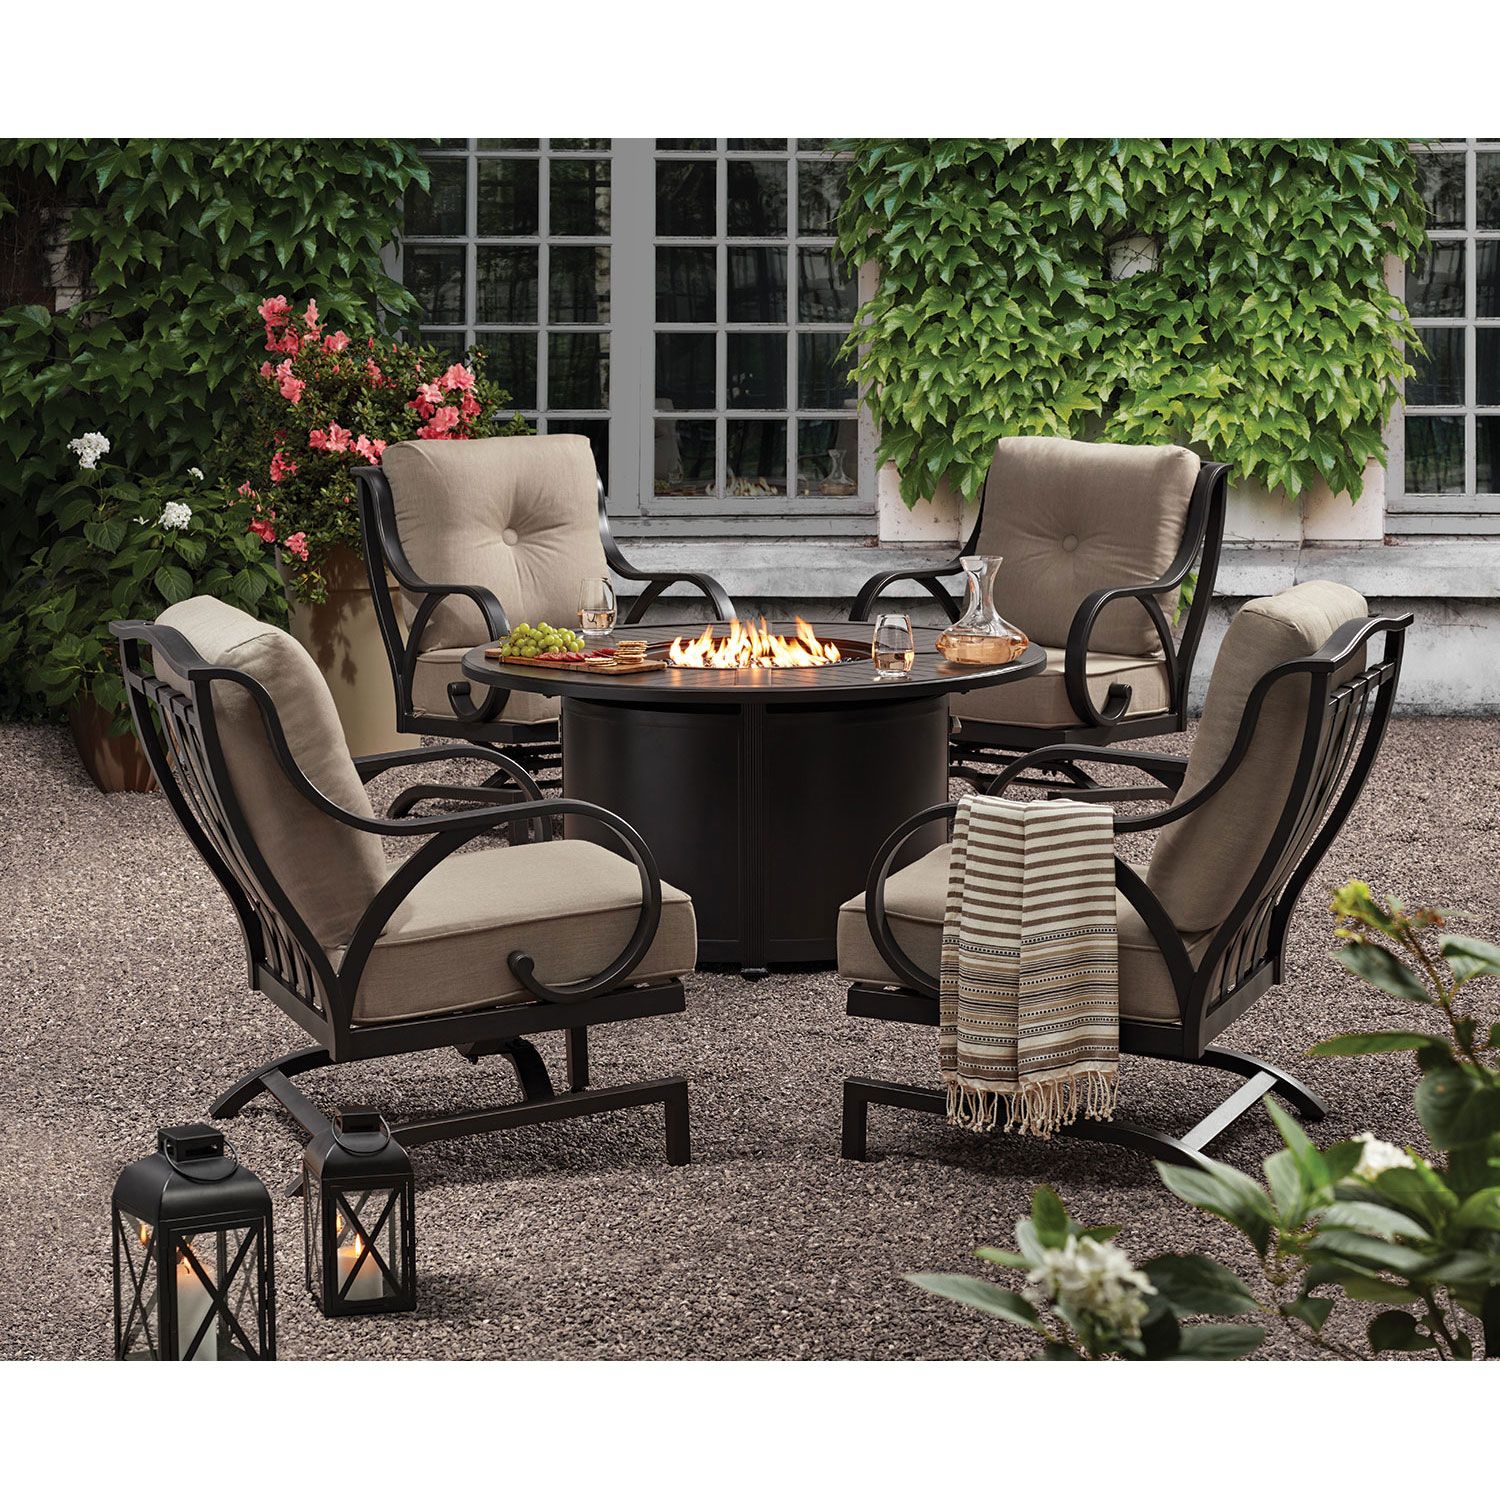 Member’s Mark Harbor Hill 5-Piece Fire Chat Set with Sunbrella Fabric Cushions